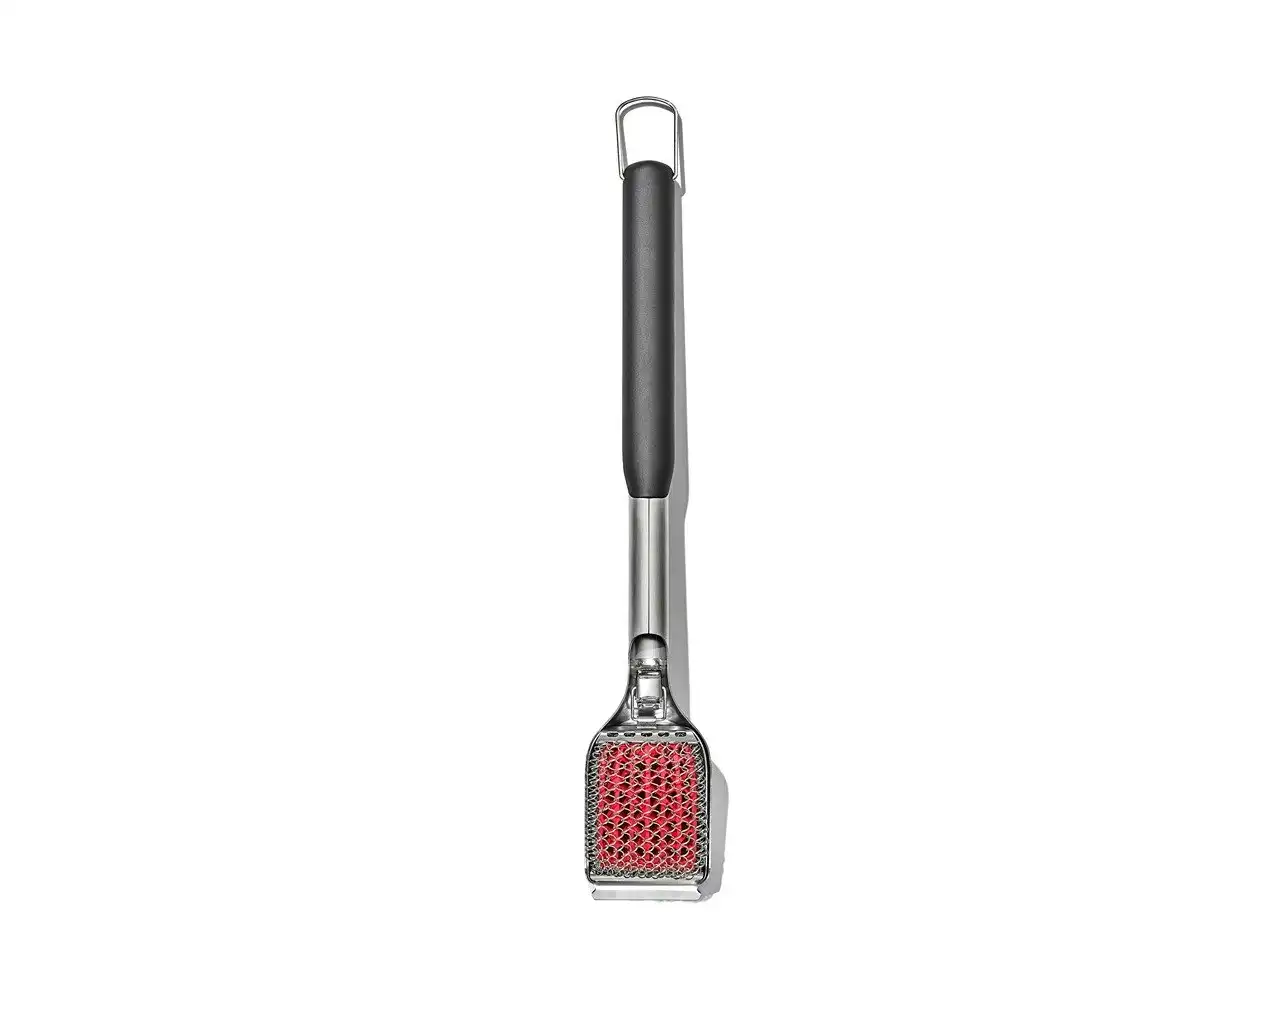 OXO Hot Clean Grill Brush with Replacement Head